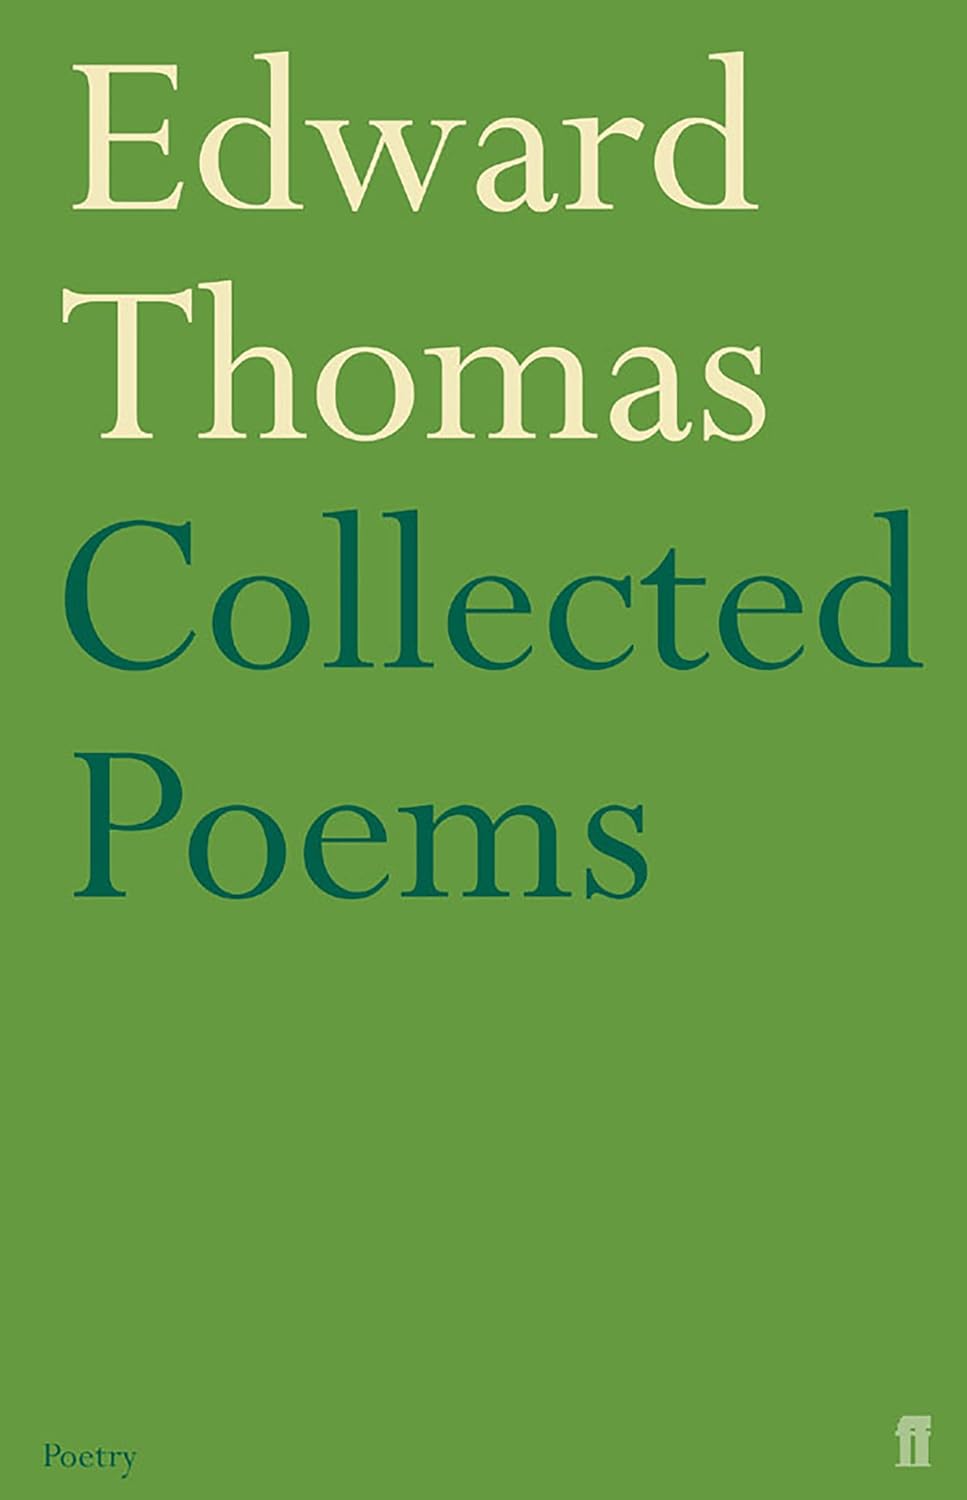 📚 Get Your Exclusive Savings on Collected Poems - Up to 23% Off!